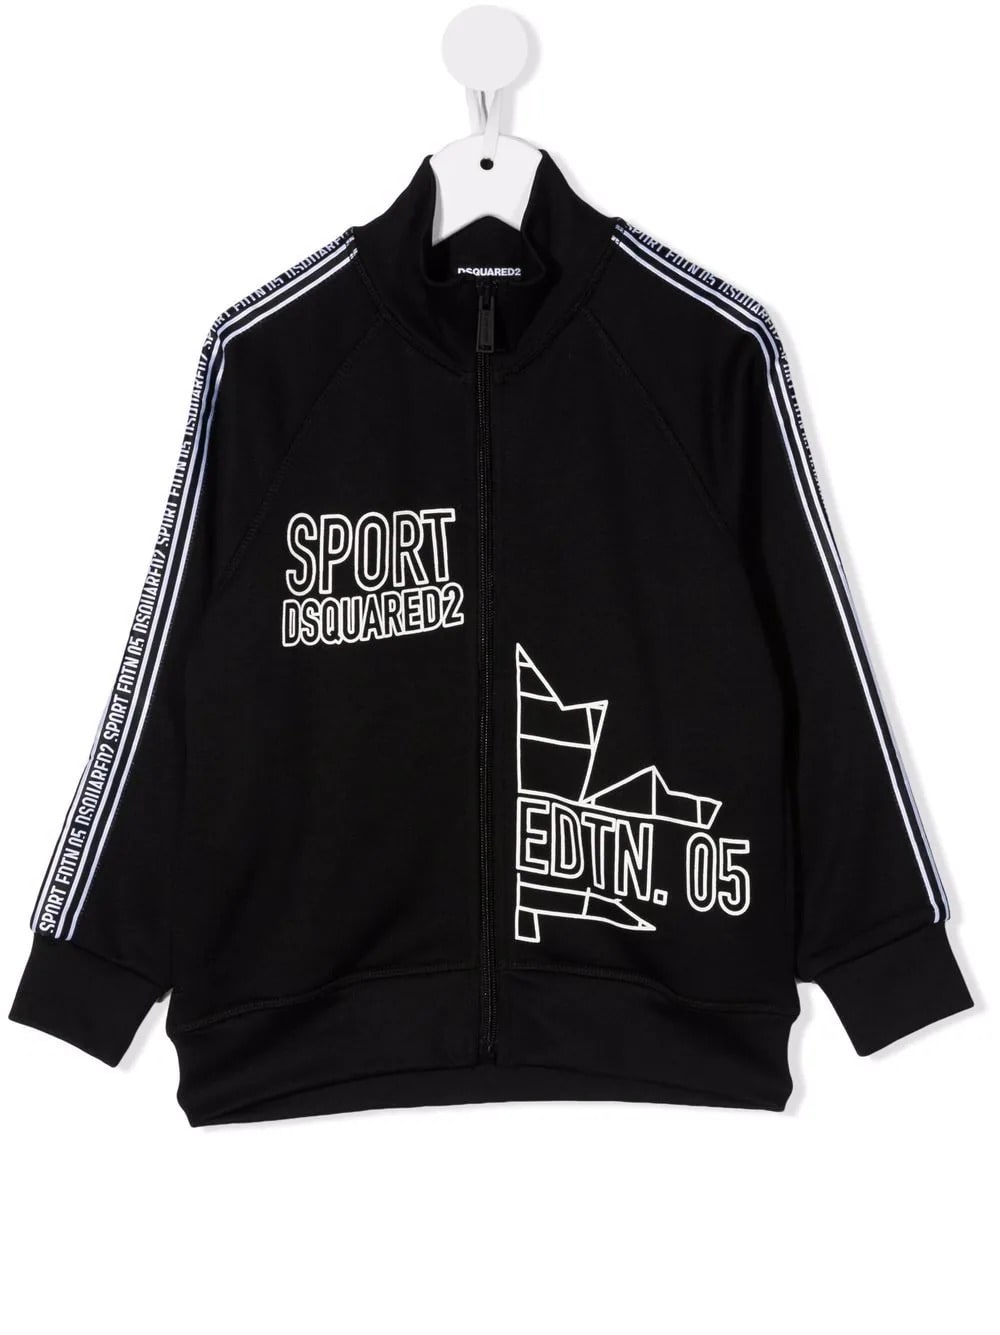 Dsquared2 Kids Black Sweatshirt With sport Edtn.05 Print And Logo Tapes On The Sleeves